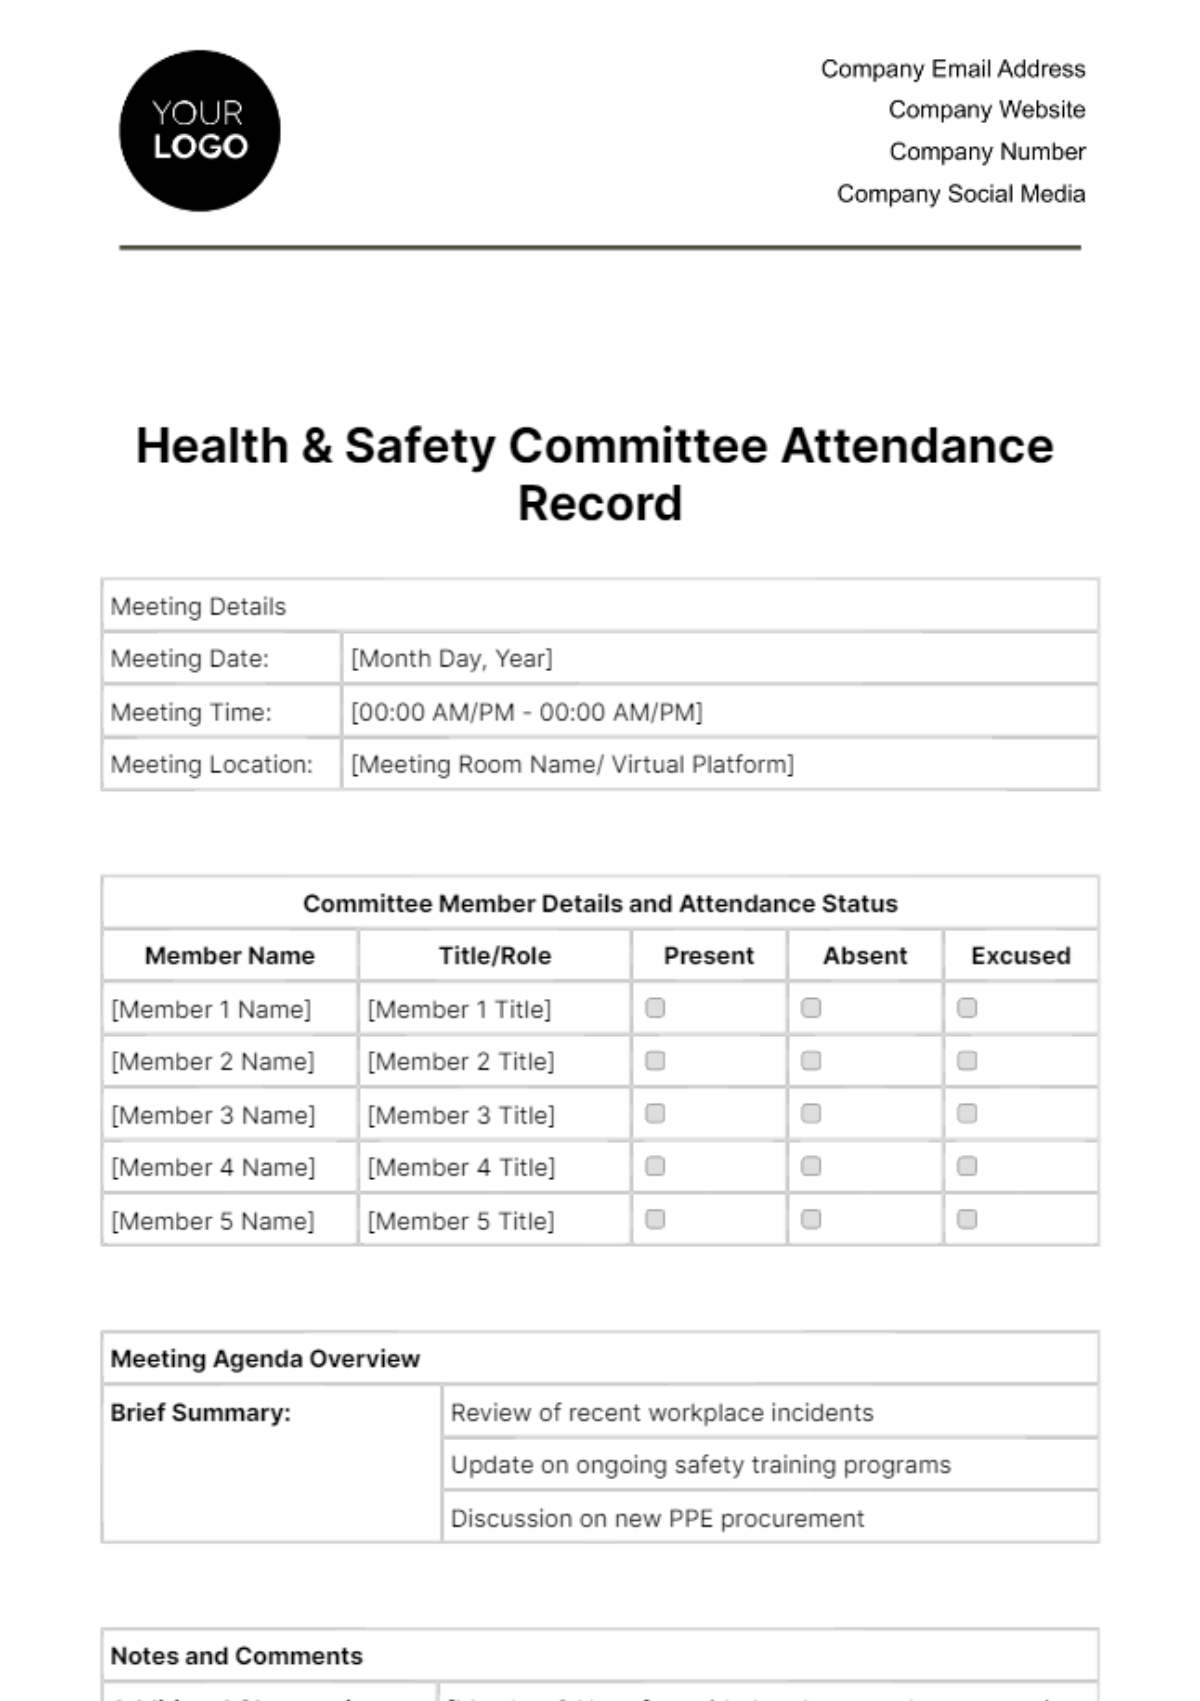 Free Health & Safety Committee Attendance Record Template